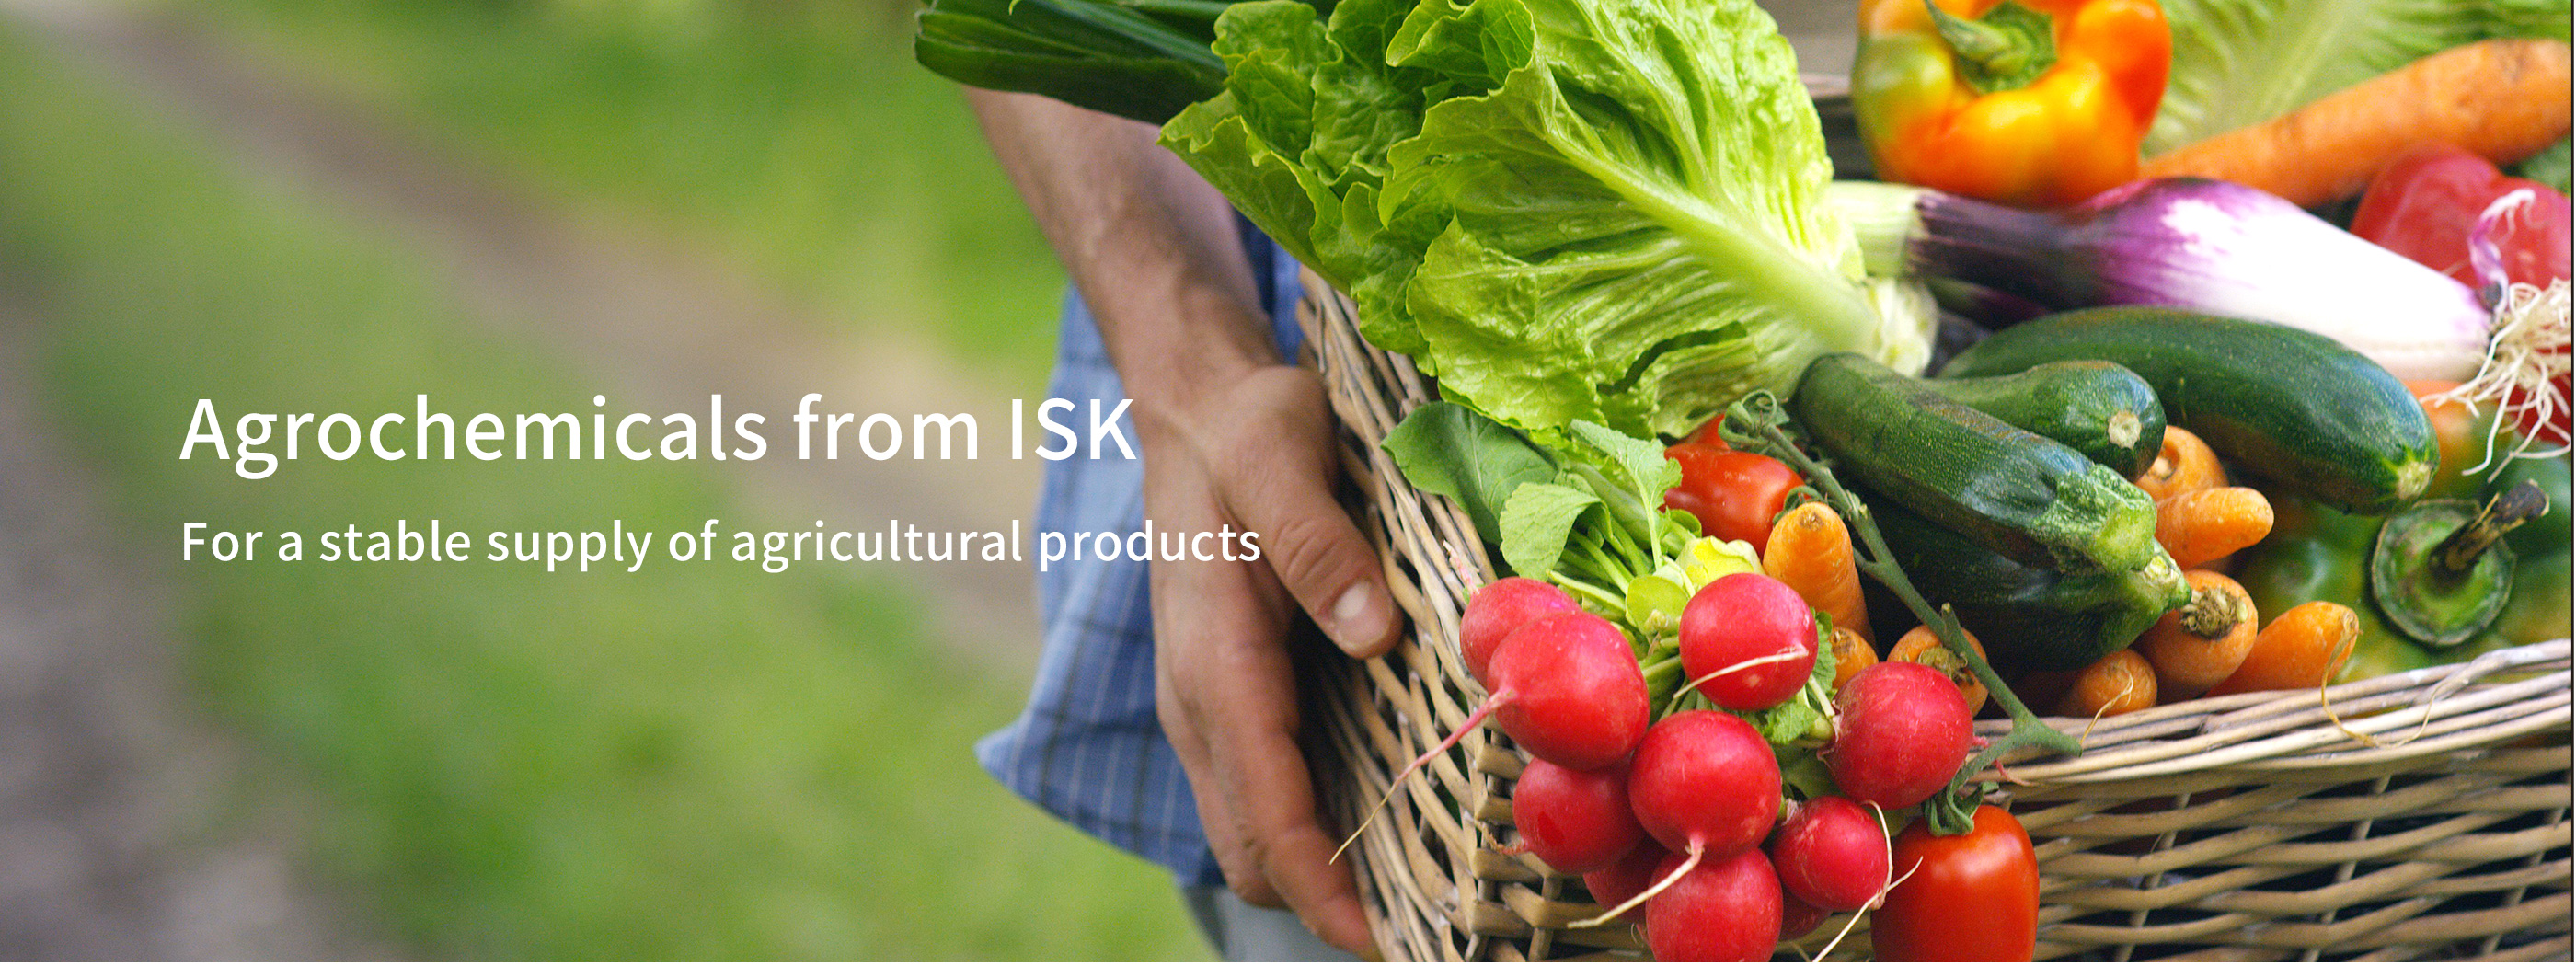 Agrochemicals from ISK For a stable supply of agricultural products